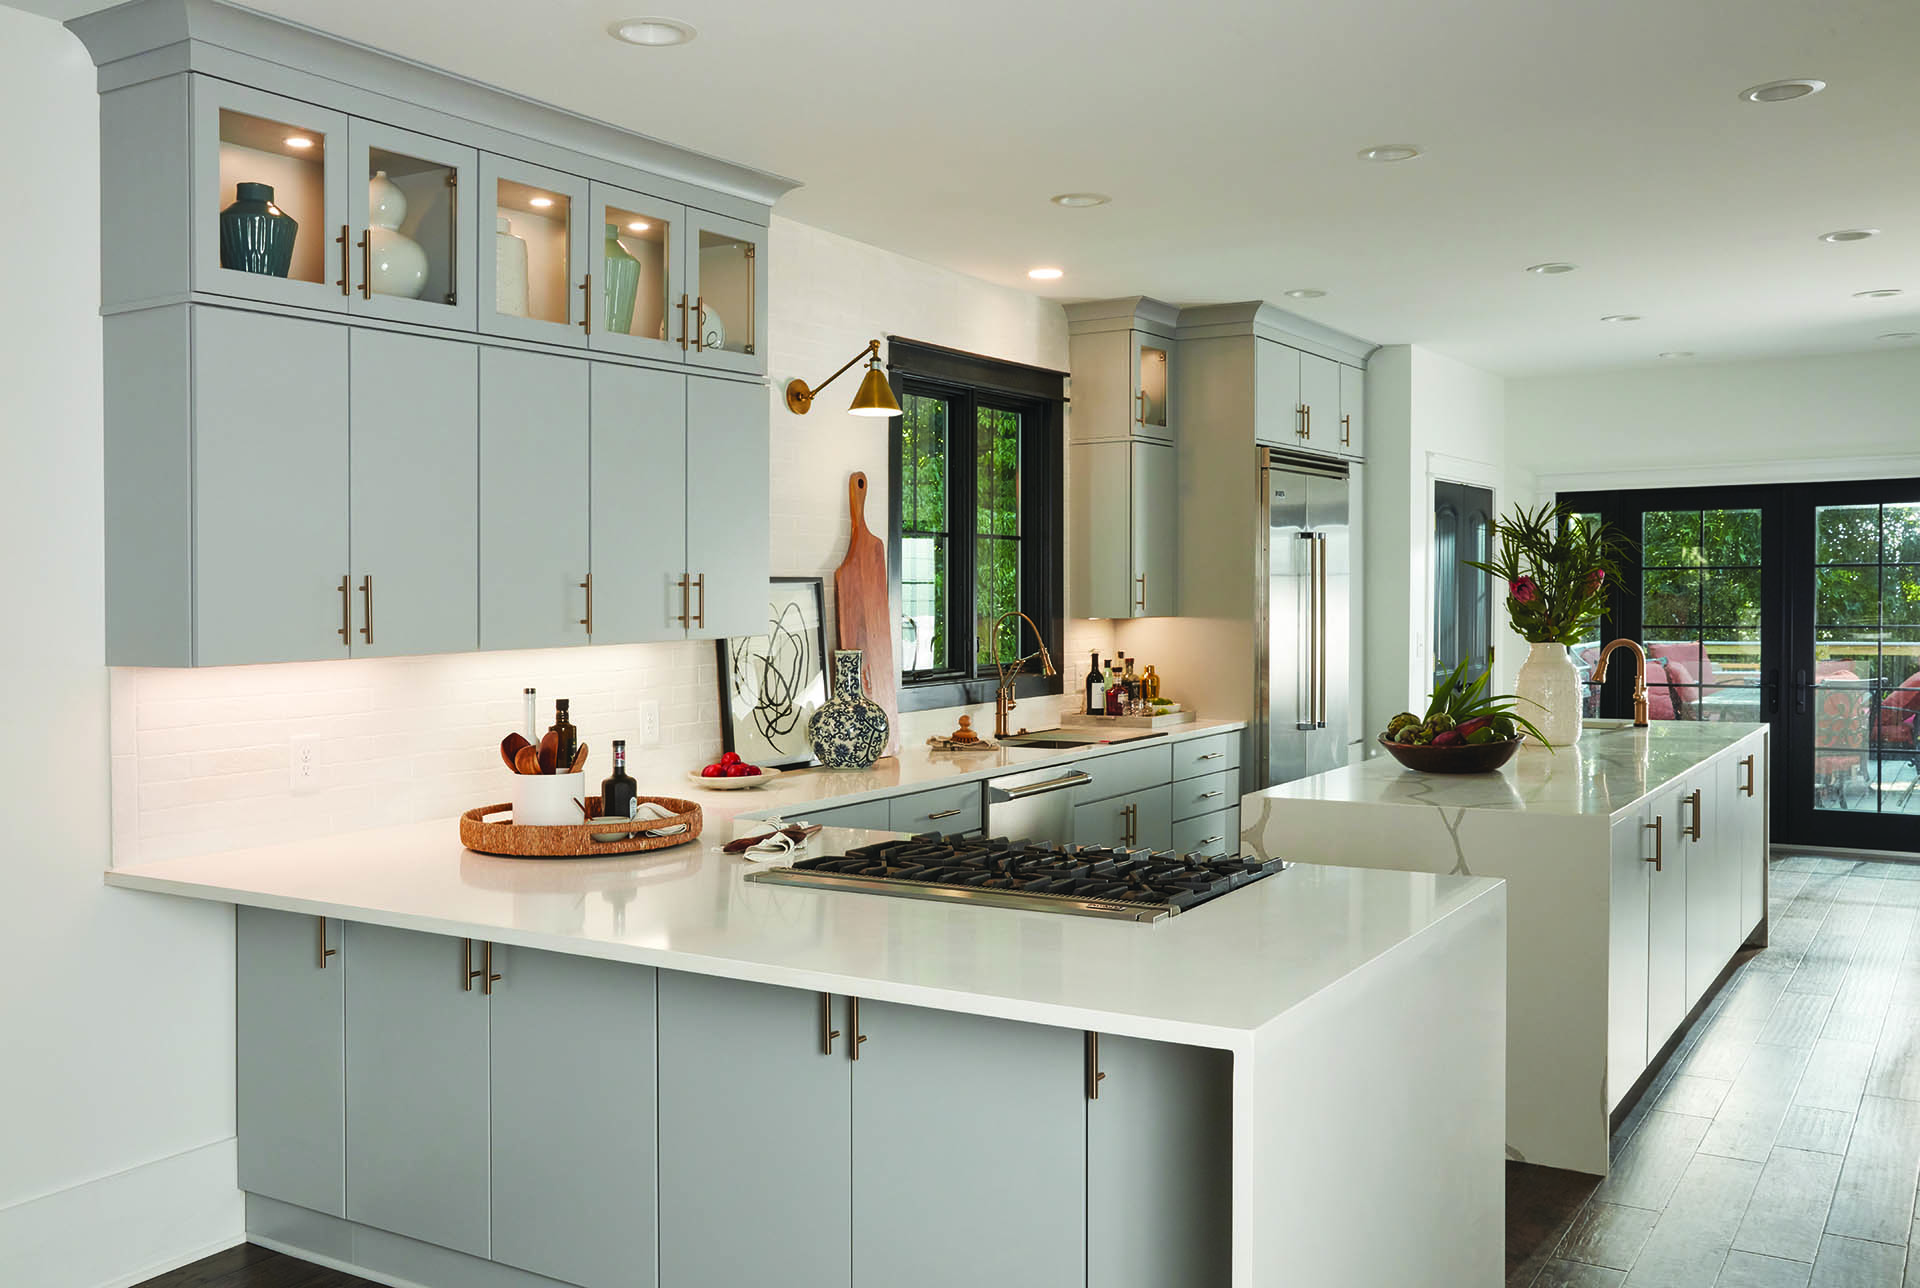 About Us Wf Cabinetry